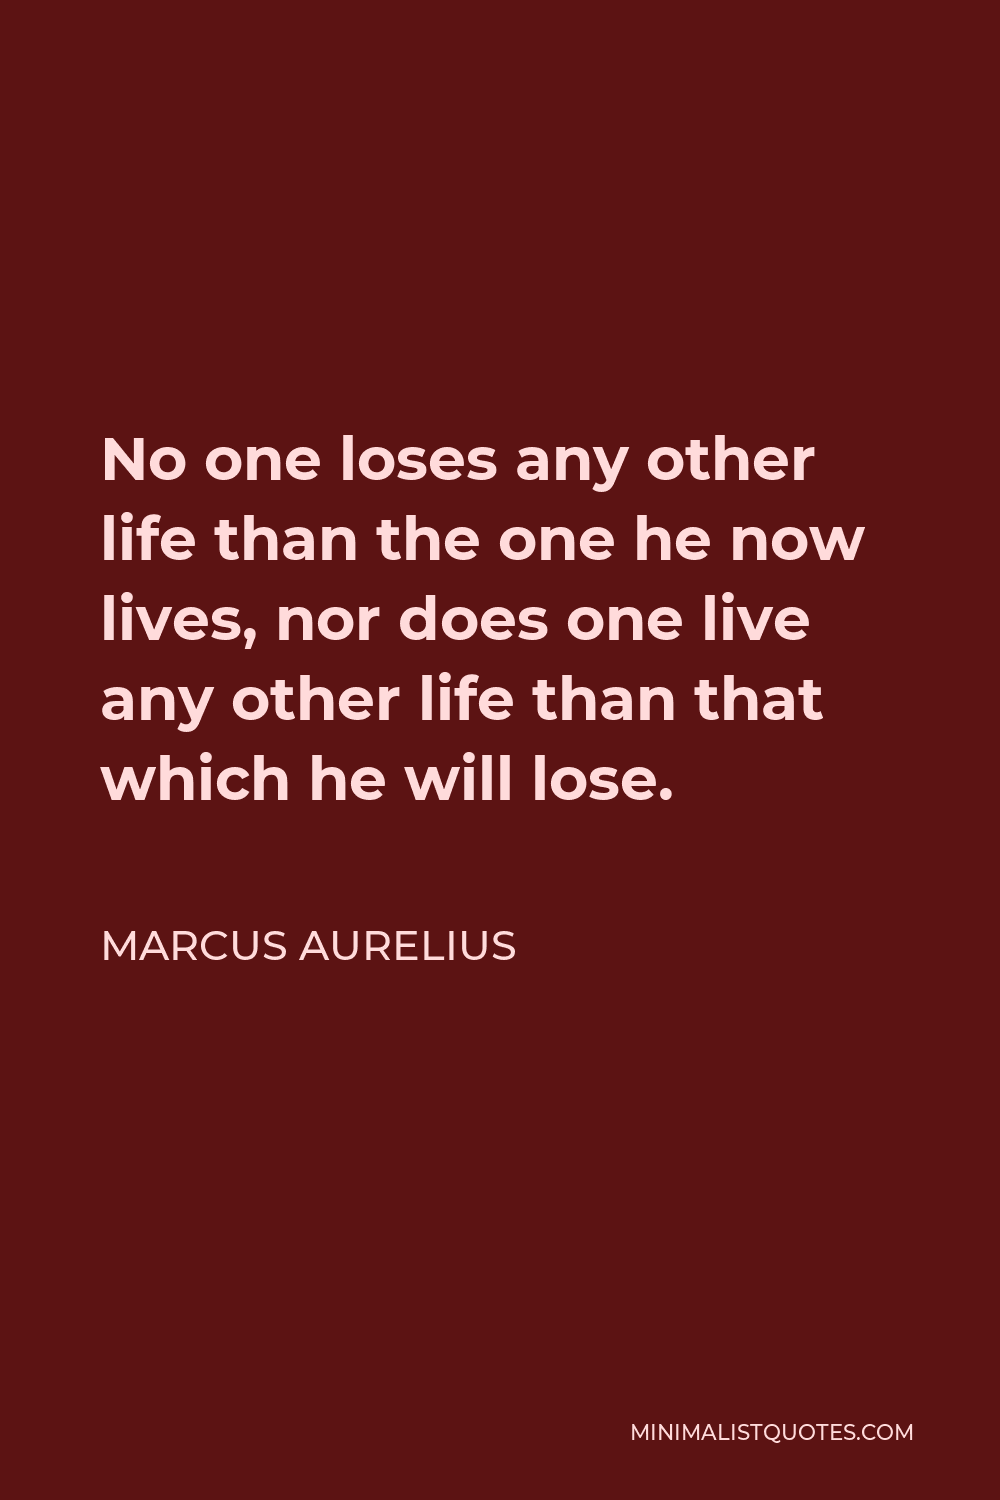 Marcus Aurelius Quote - No one loses any other life than the one he now lives, nor does one live any other life than that which he will lose.